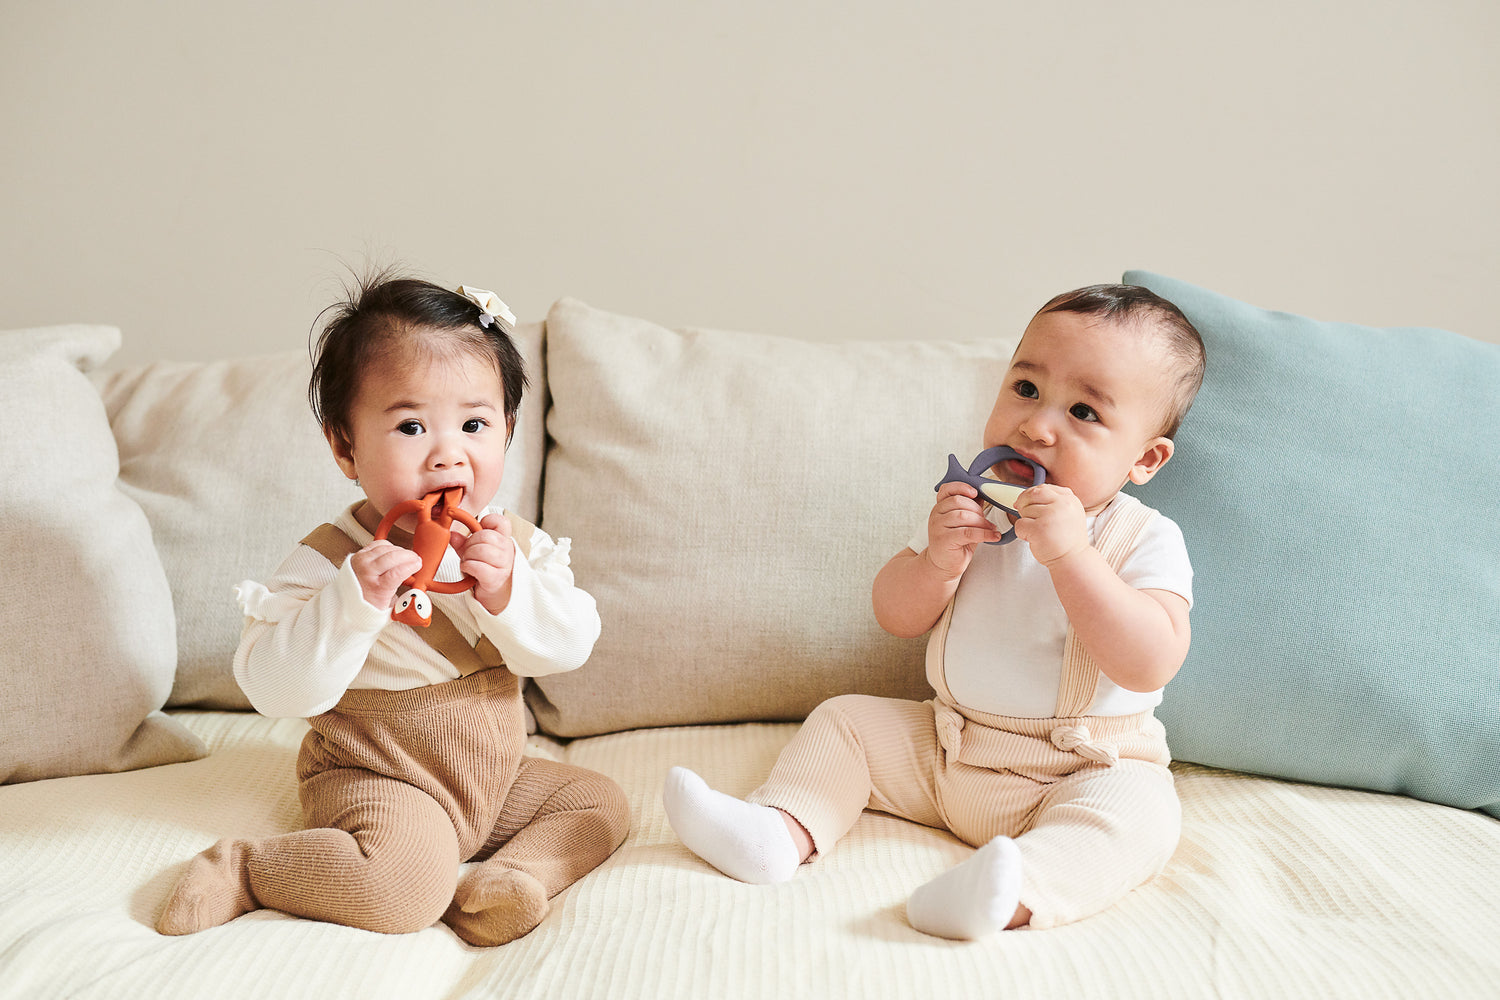 What’s so Special about Matchstick Monkey Teething Toys?